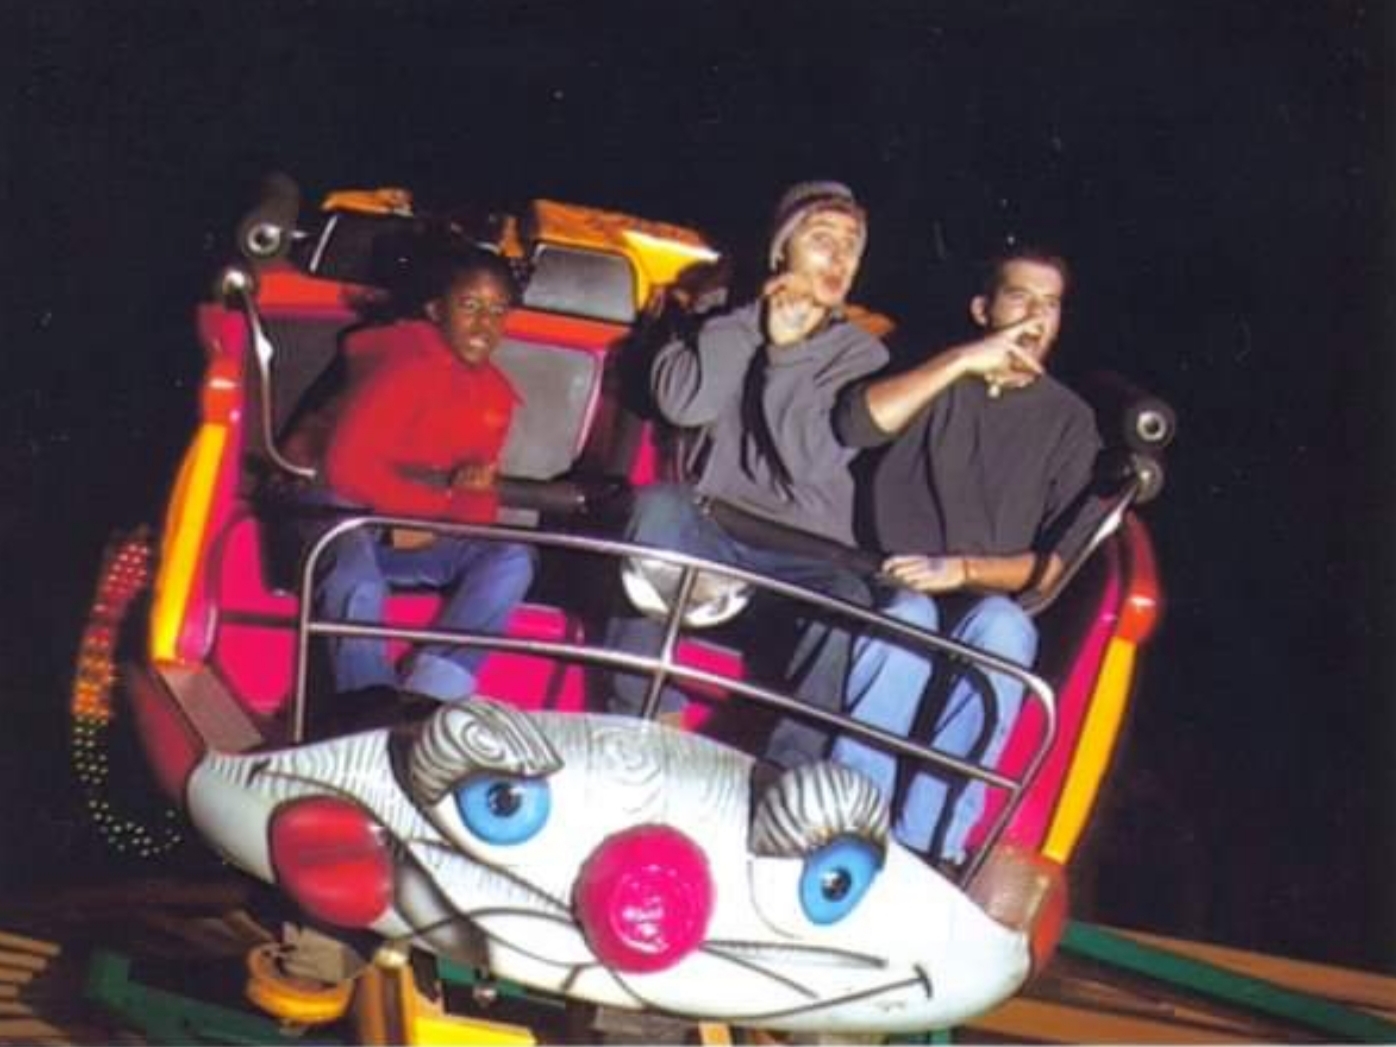 Came across this old photo from highschool taken on the "Crazy Mouse" ride at local Fair. Buddy and I screwing around for the camera as obviously terrified girl holds on for dear life.